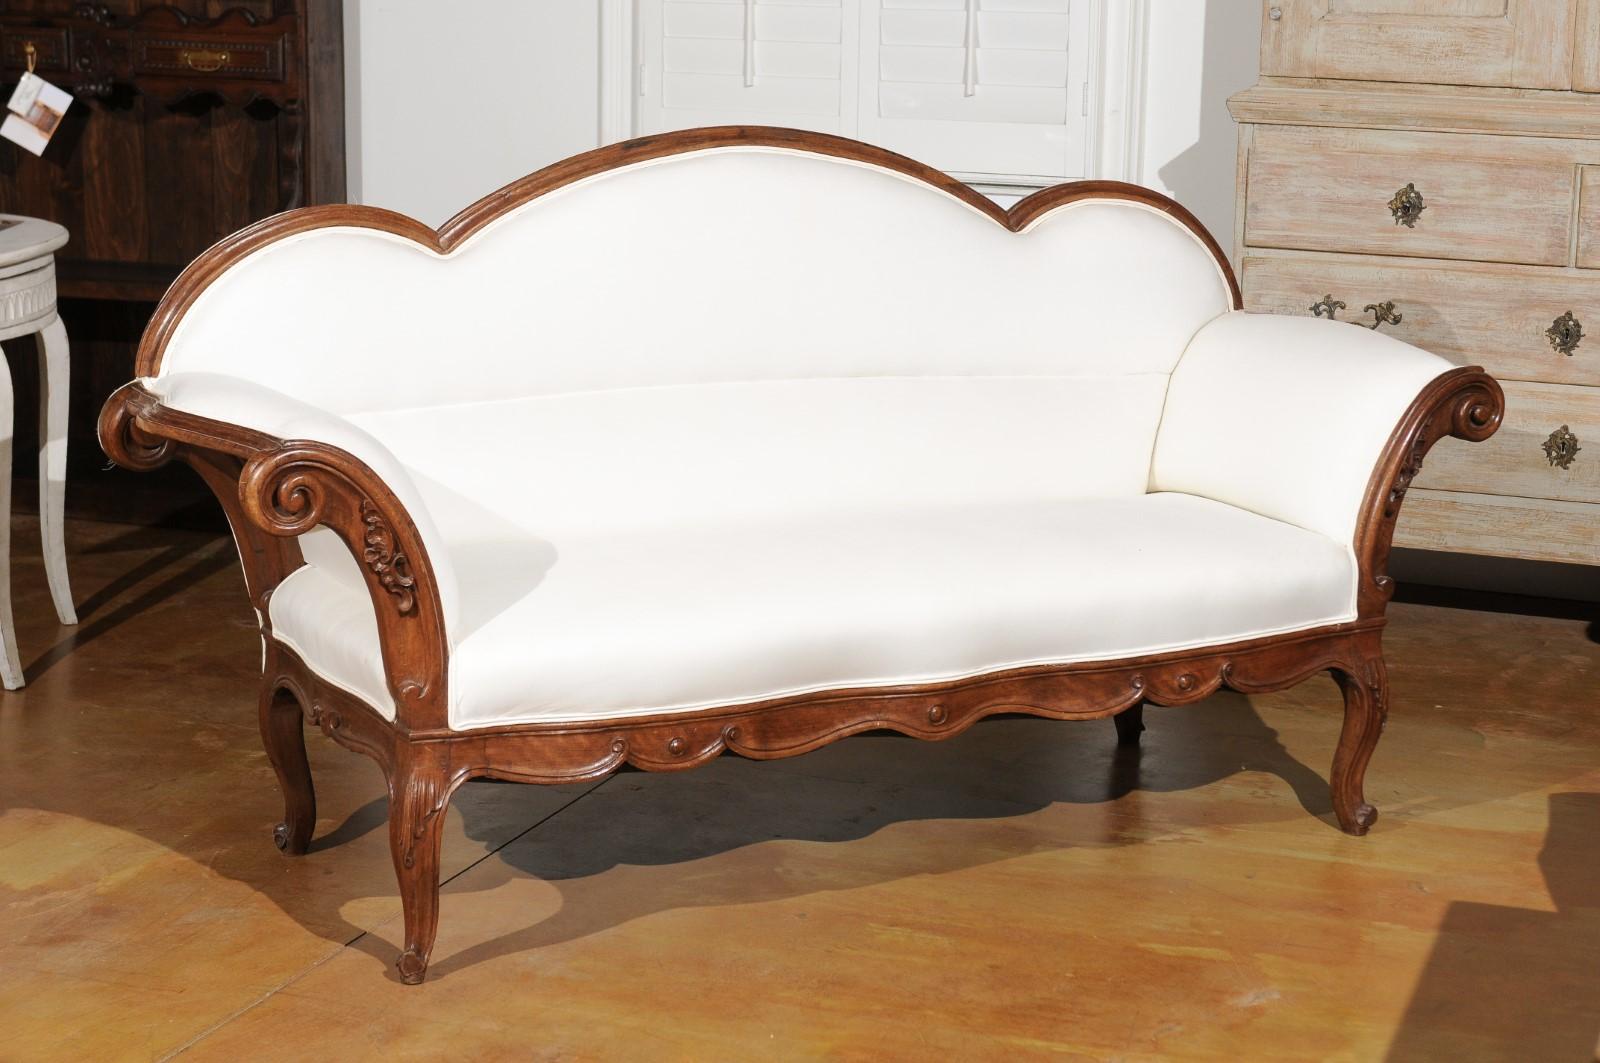 An Italian walnut sofa from the mid-18th century, with triple arched back, out-scrolling arms and upholstery. Born in Lombardy during the 1750s, this exquisite walnut sofa features a triple arched back connected to two out-scrolling arms, adorned